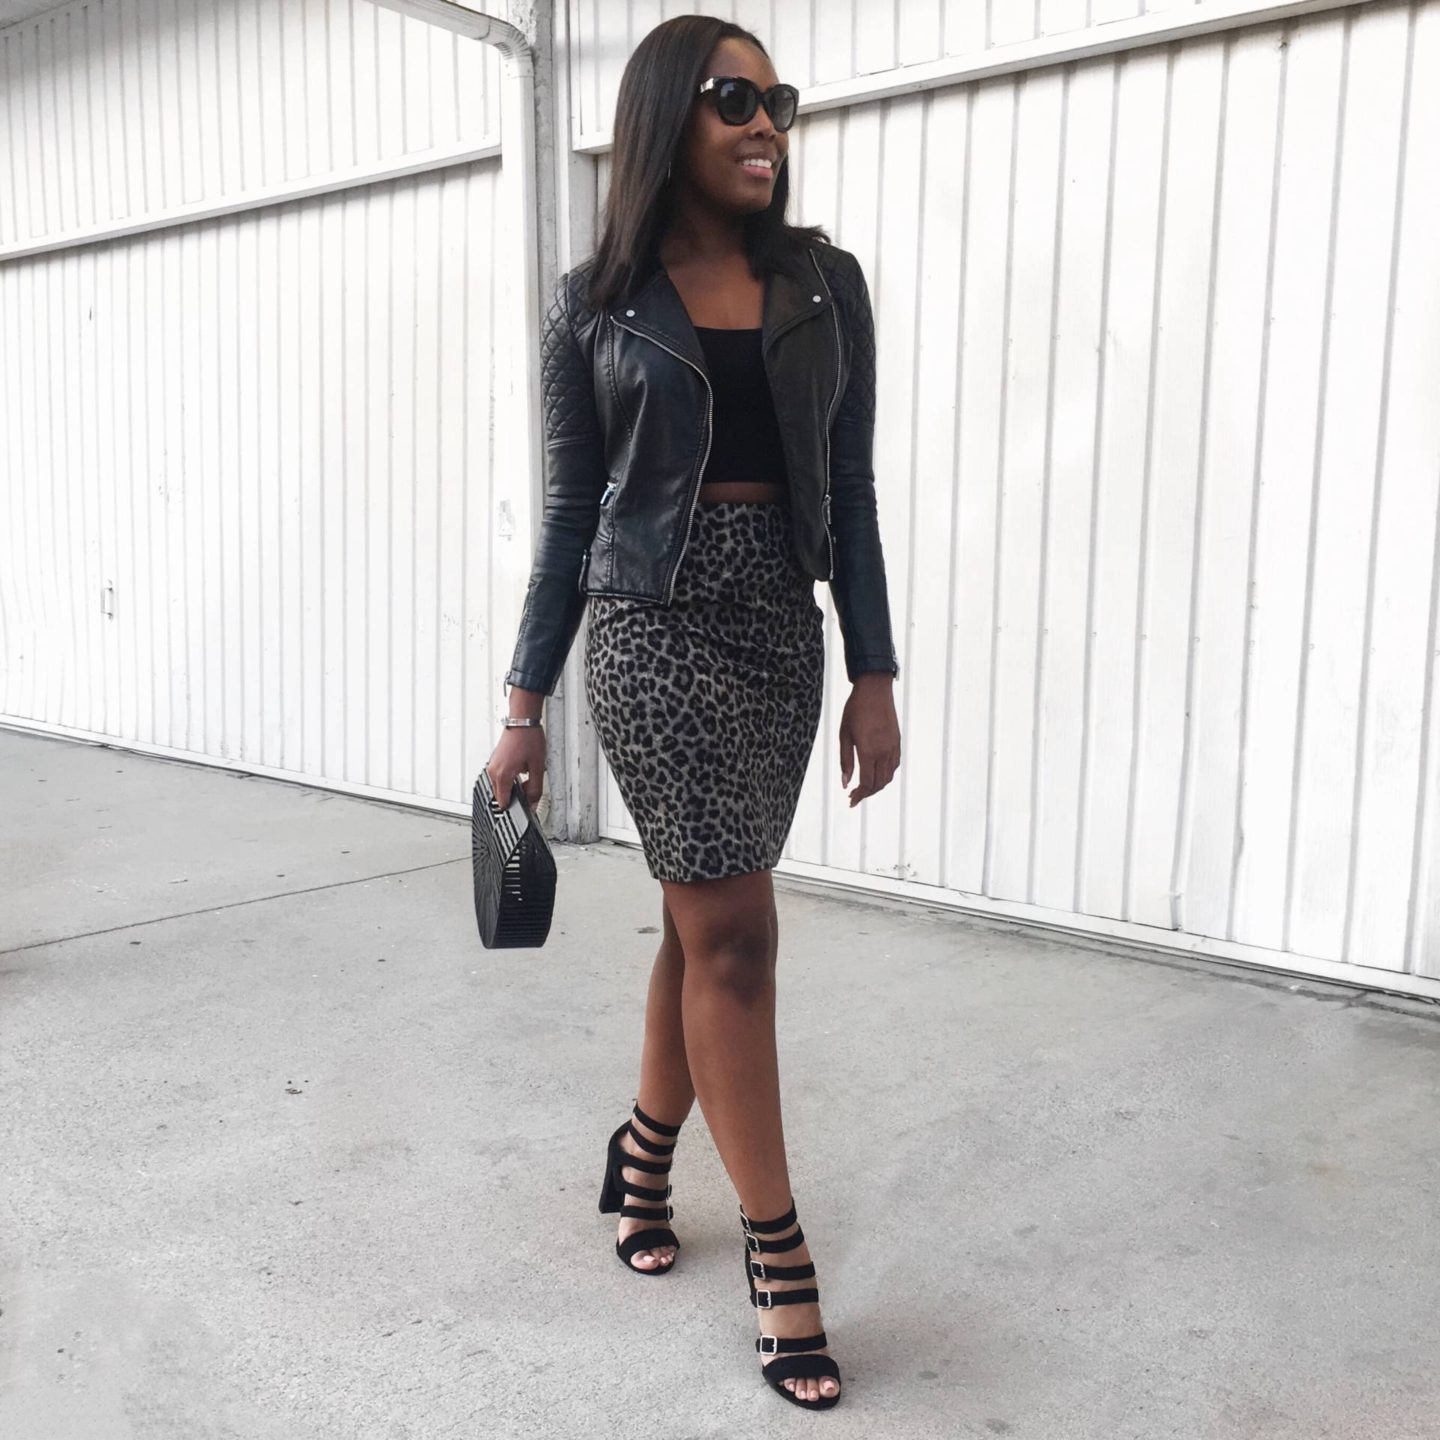 Style Tips for Wearing Leopard Print - Le Fab Chic